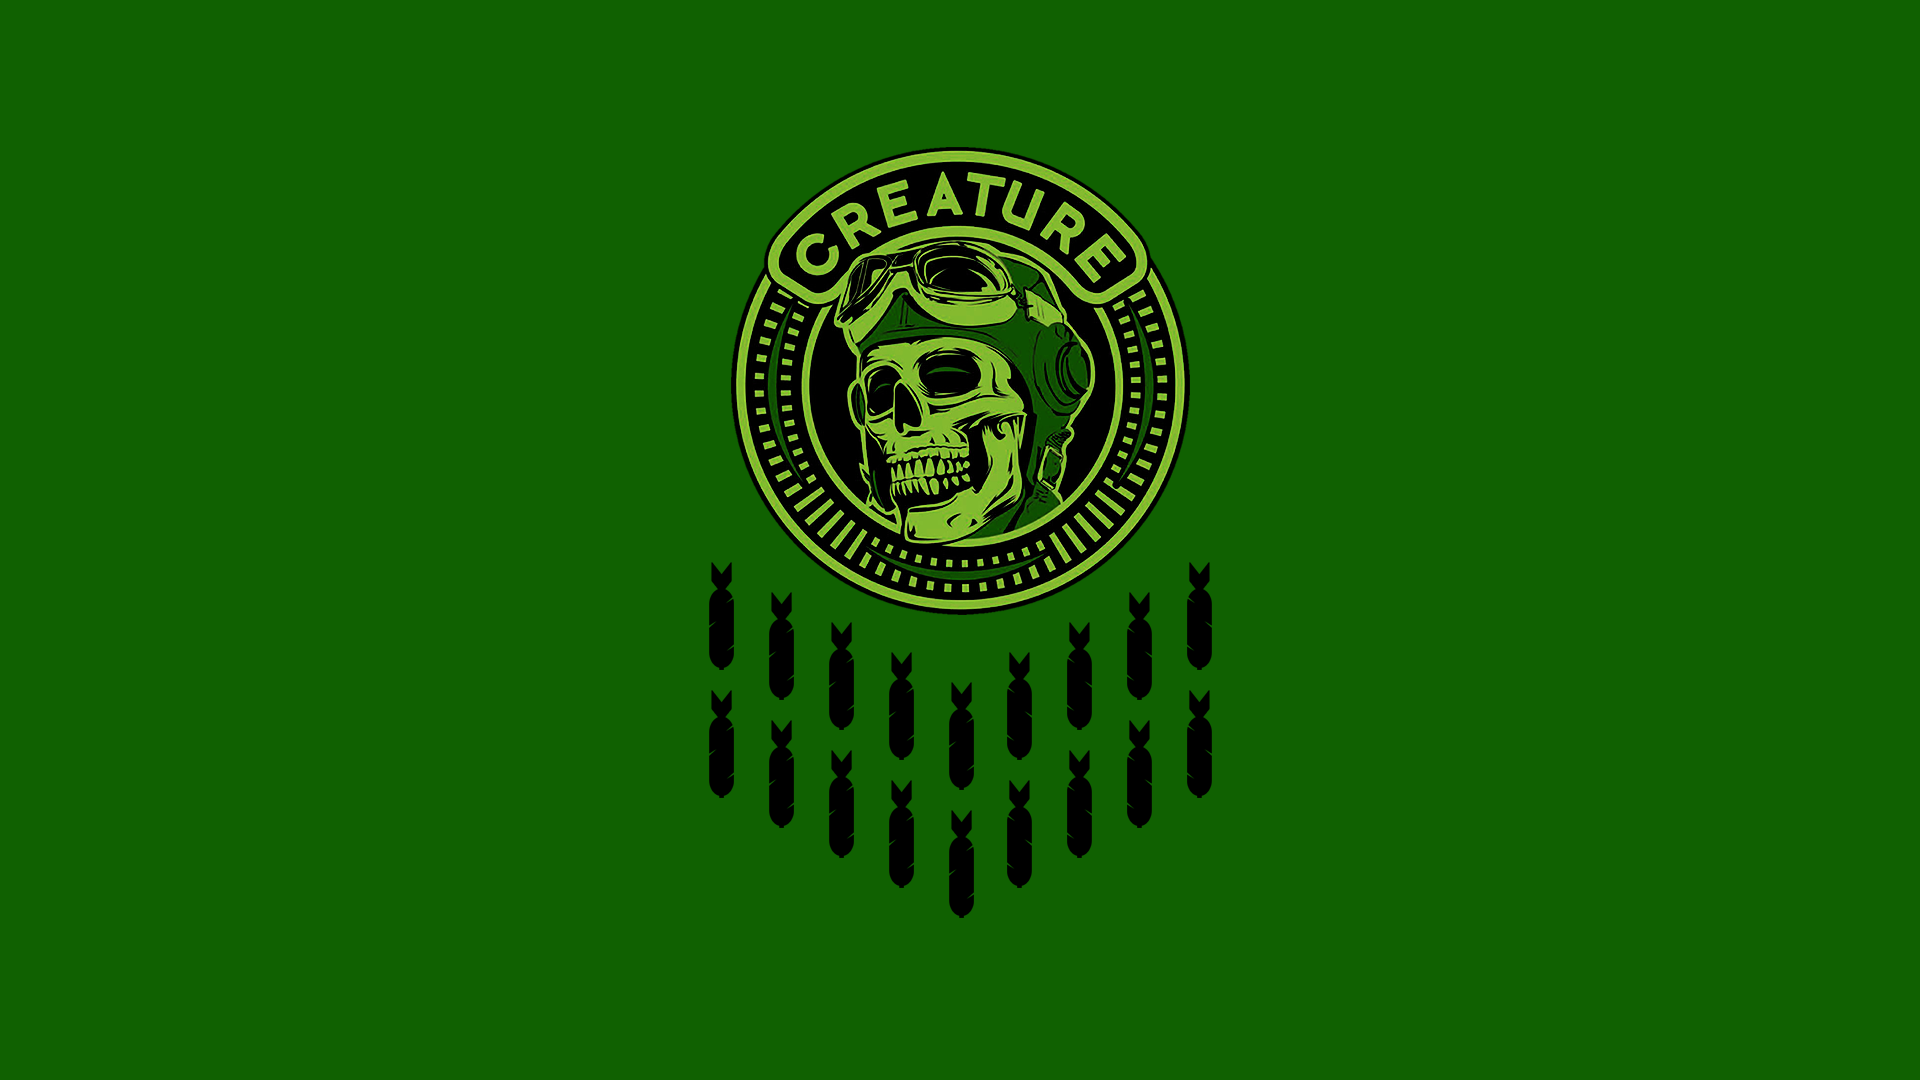 Creature Skateboards Wallpapers